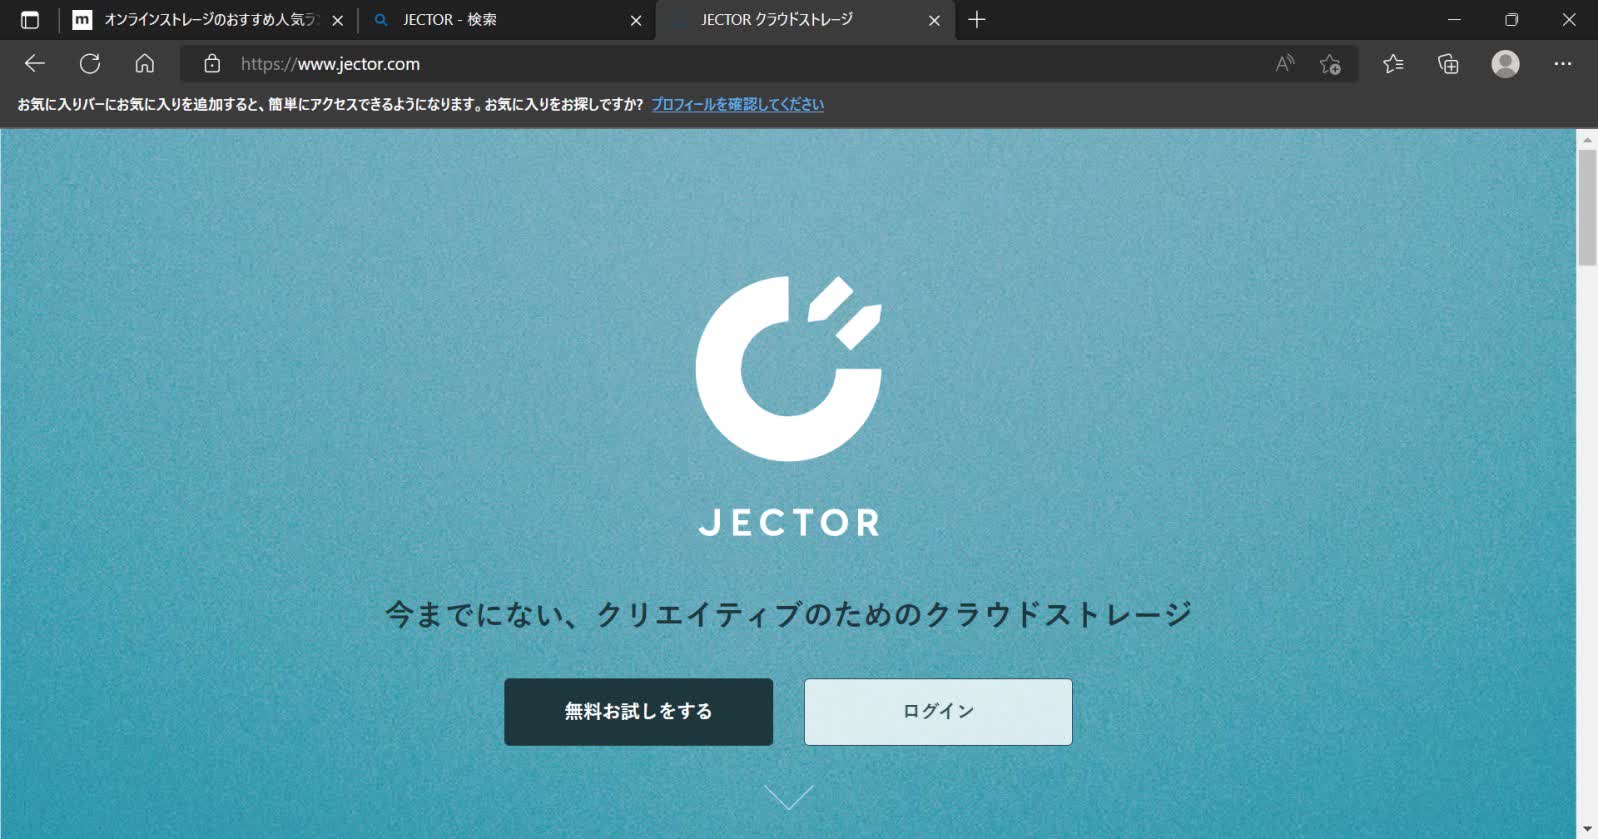 JECTOR